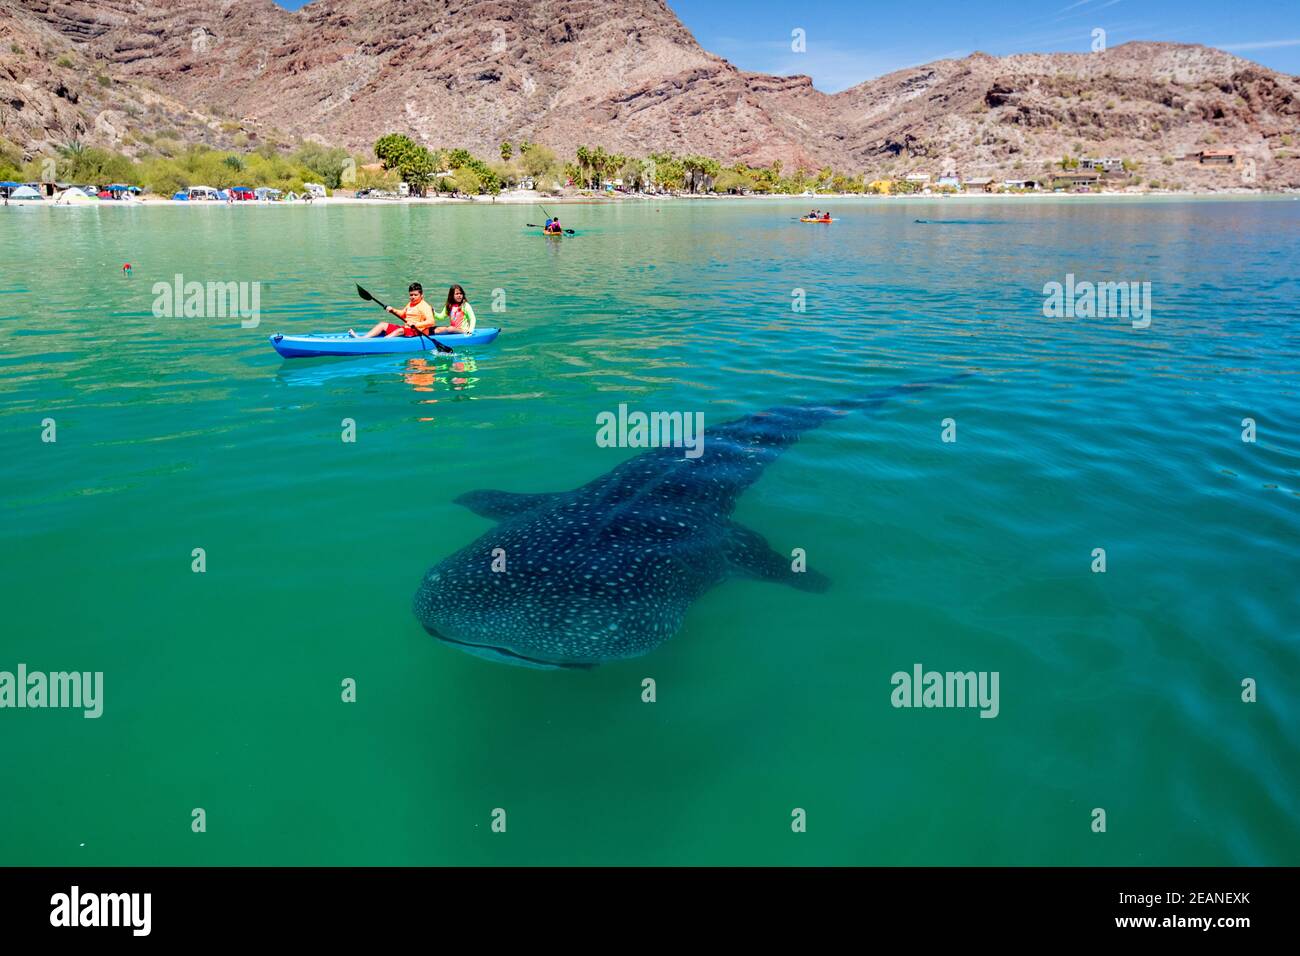 A young whale shark (Rhincodon typus), near kayaker in Bahia Coyote, Conception Bay, Baja California Sur, Mexico, North America Stock Photo